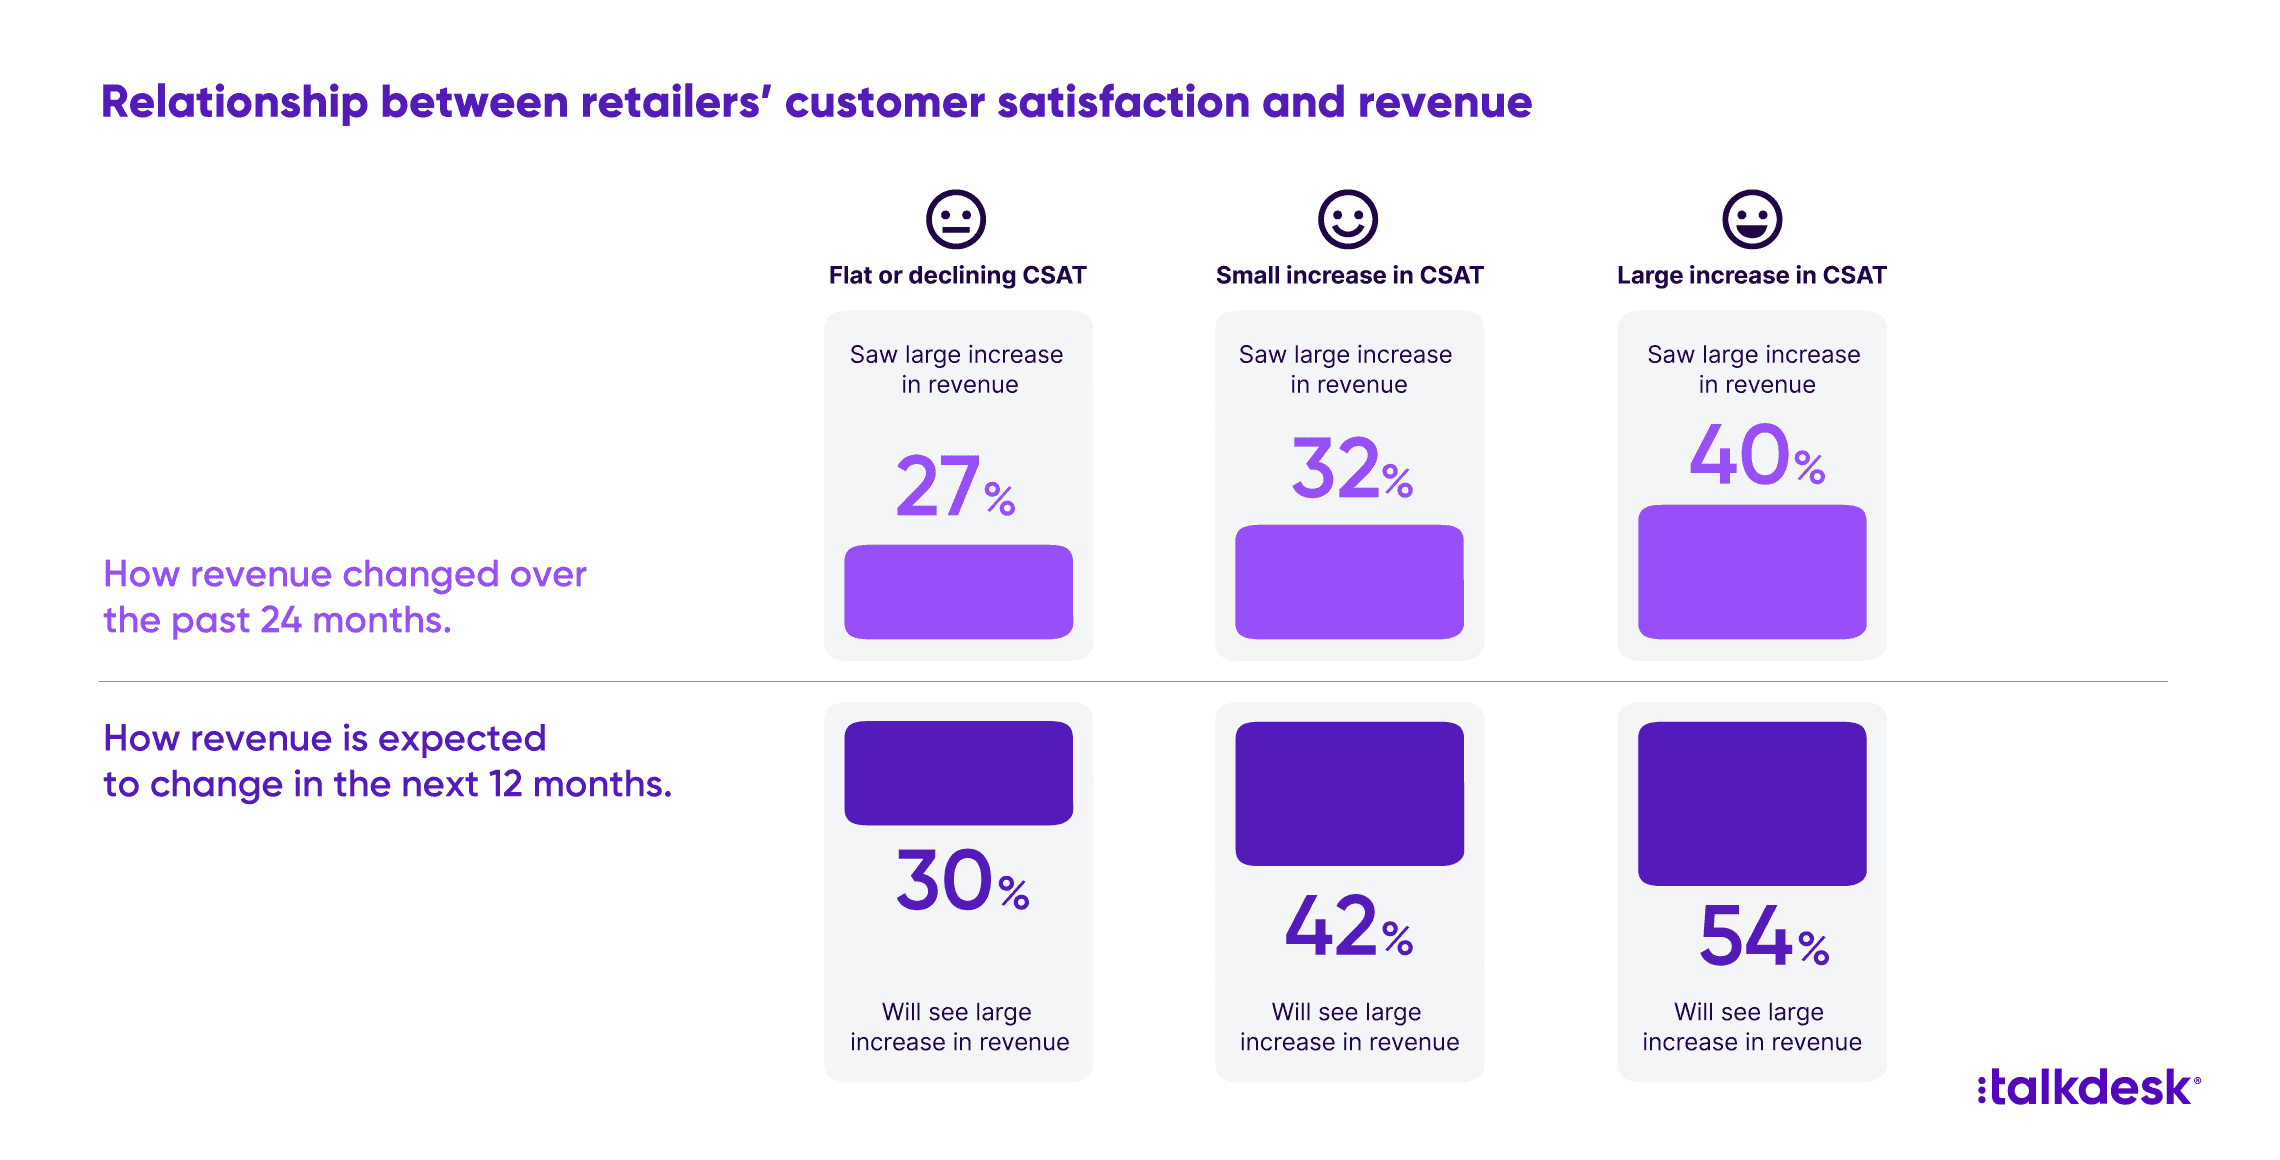 Numeric representation (in percentage) of the relationship between retailers' customer satisfaction and revenue